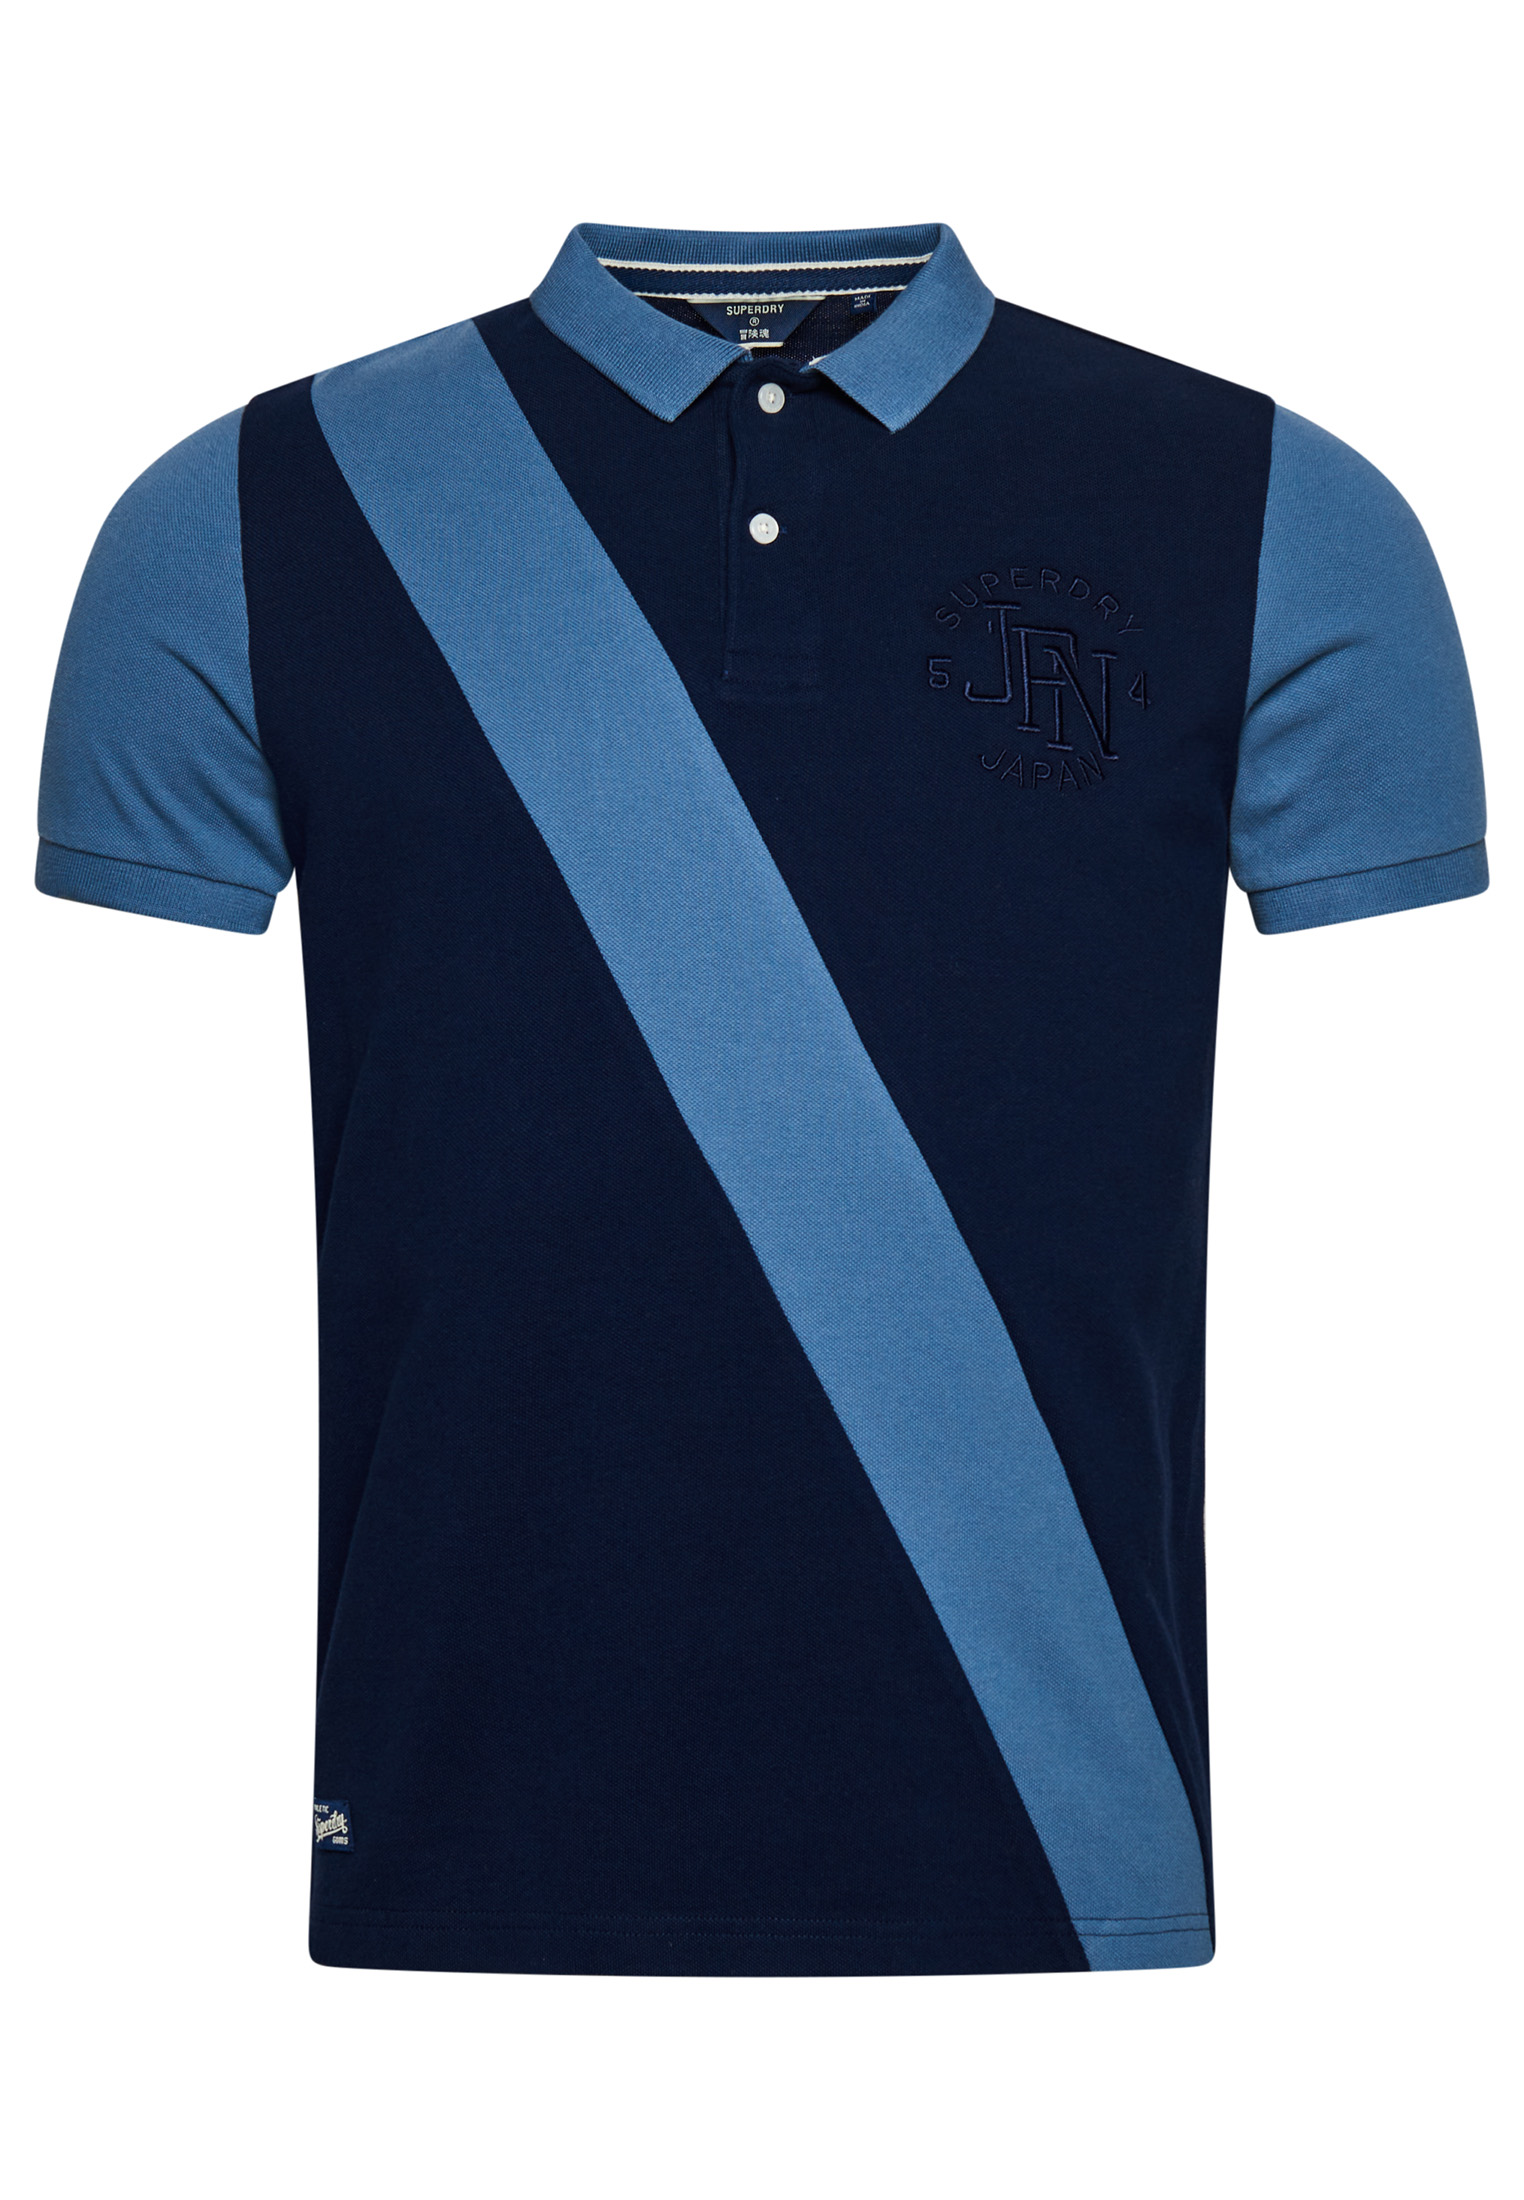 Superdry Mens Organic Cotton Vintage Superstate Polo Shirt